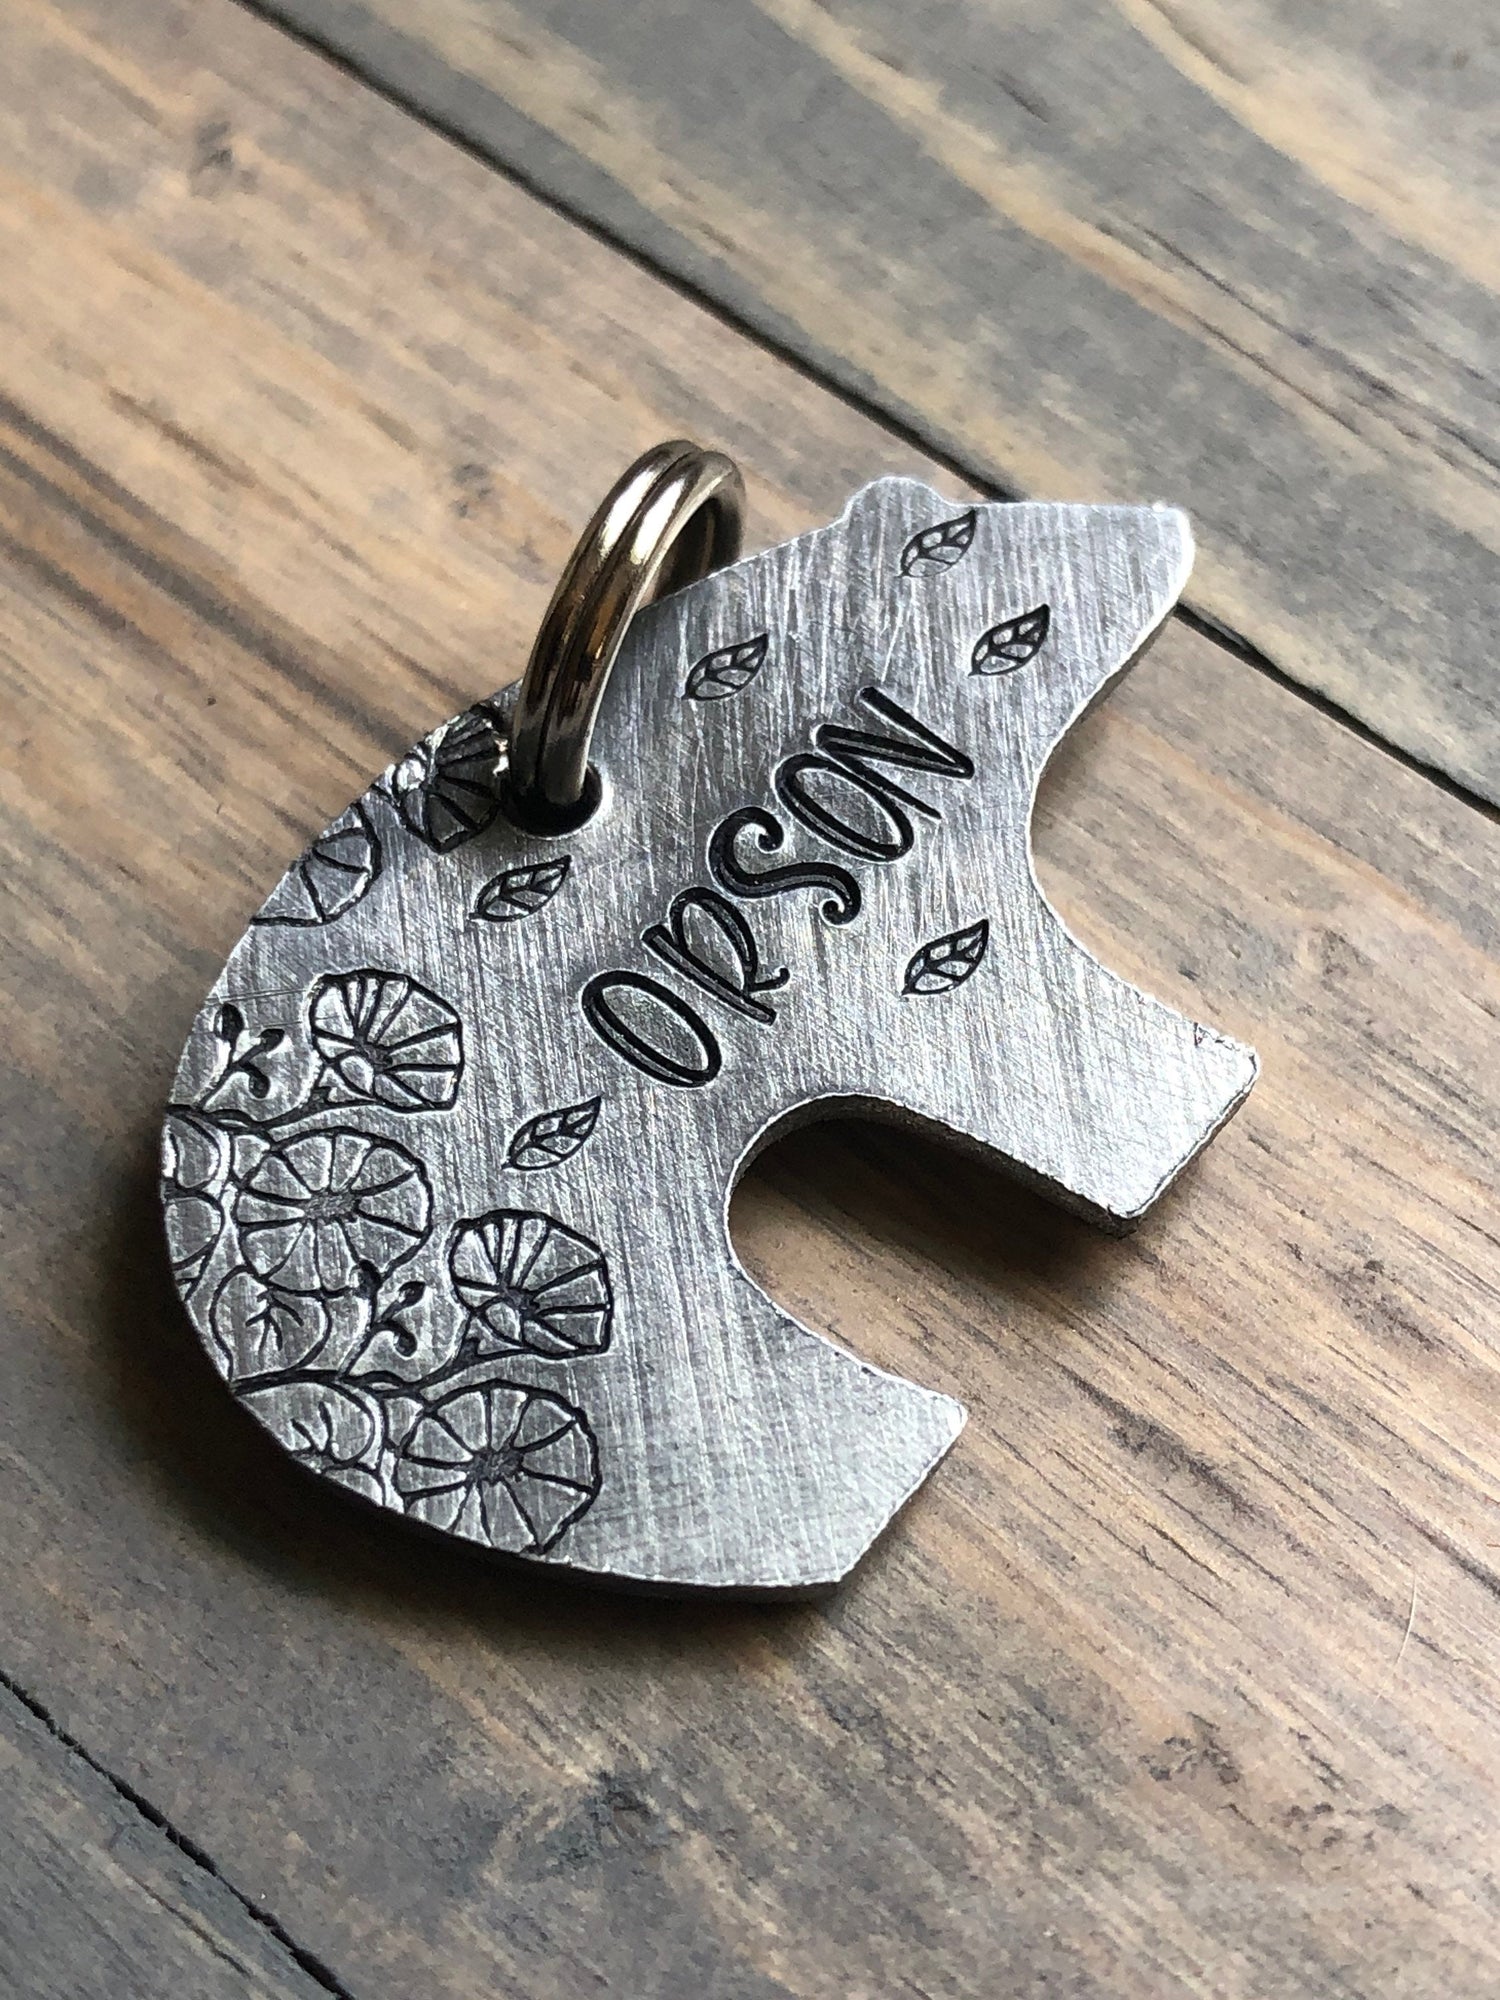 Custom Zuni Bear Dog Tag, Hand Stamped Pet ID, Personalized Dog Tag for Dog, Floral Dog Tag with Morning Glories